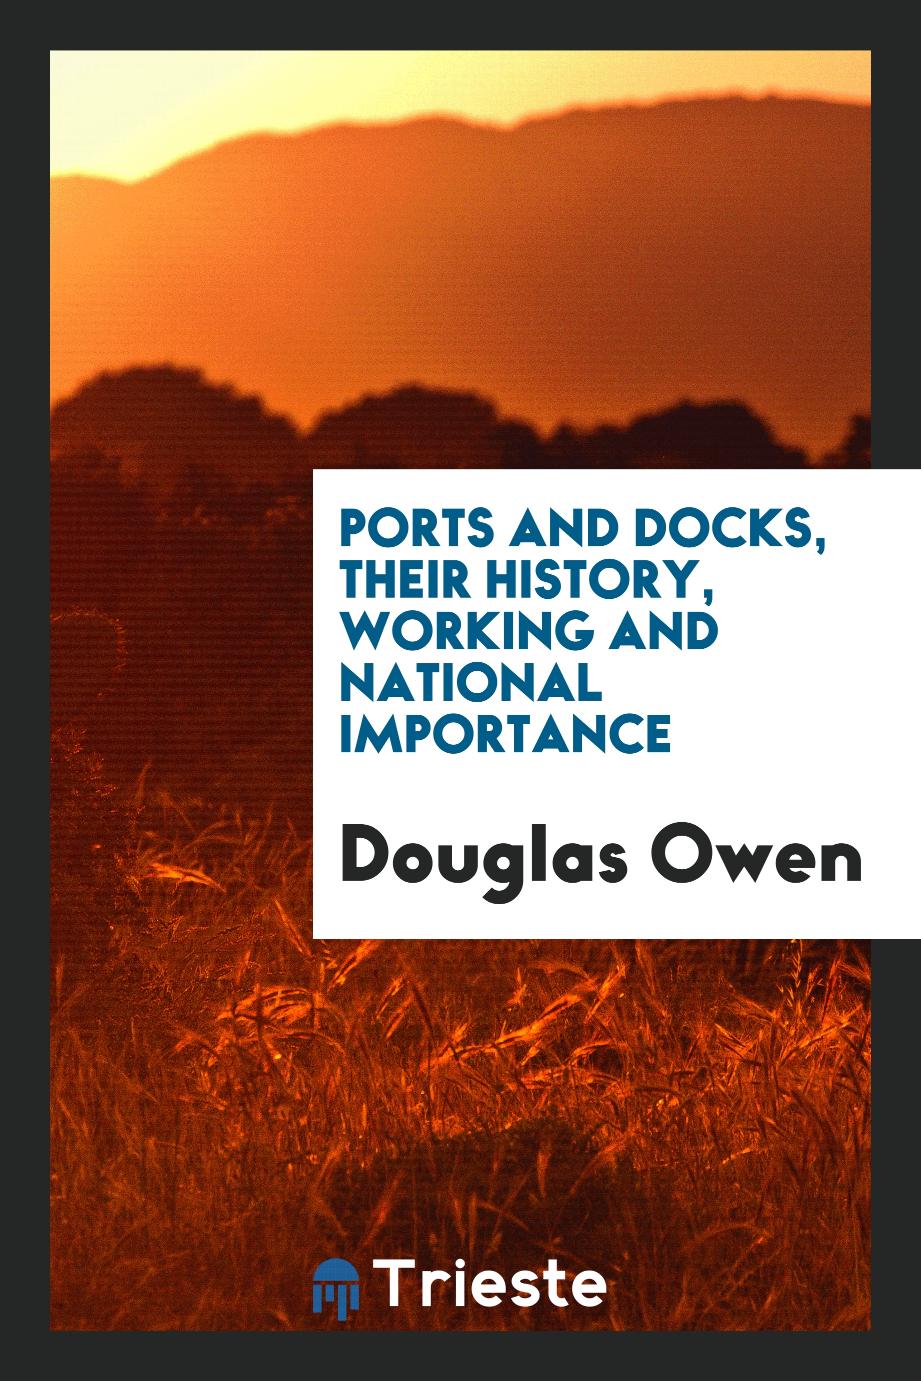 Ports and docks, their history, working and national importance